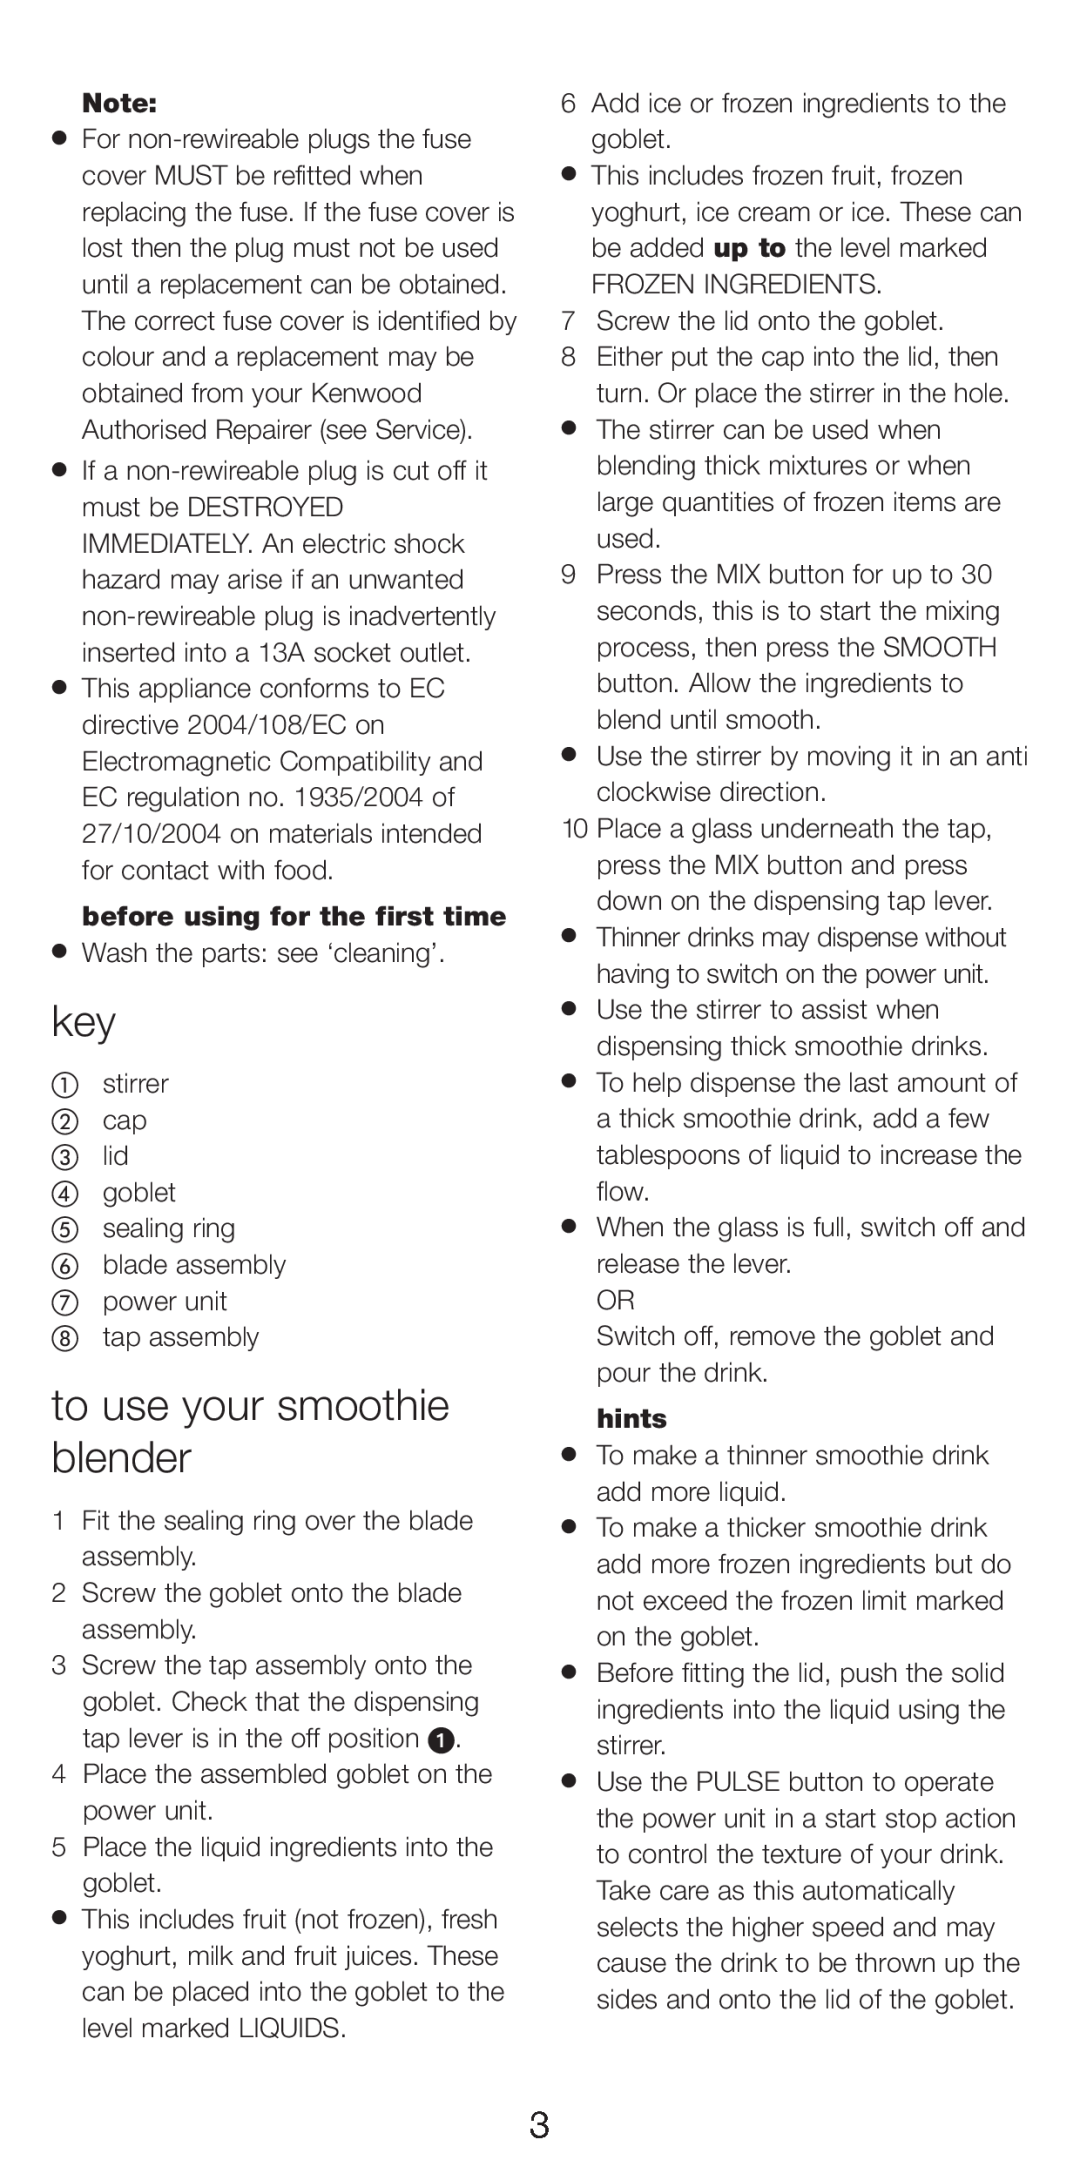 Kenwood SB240 manual to use your smoothie blender, before using for the first time, hints 